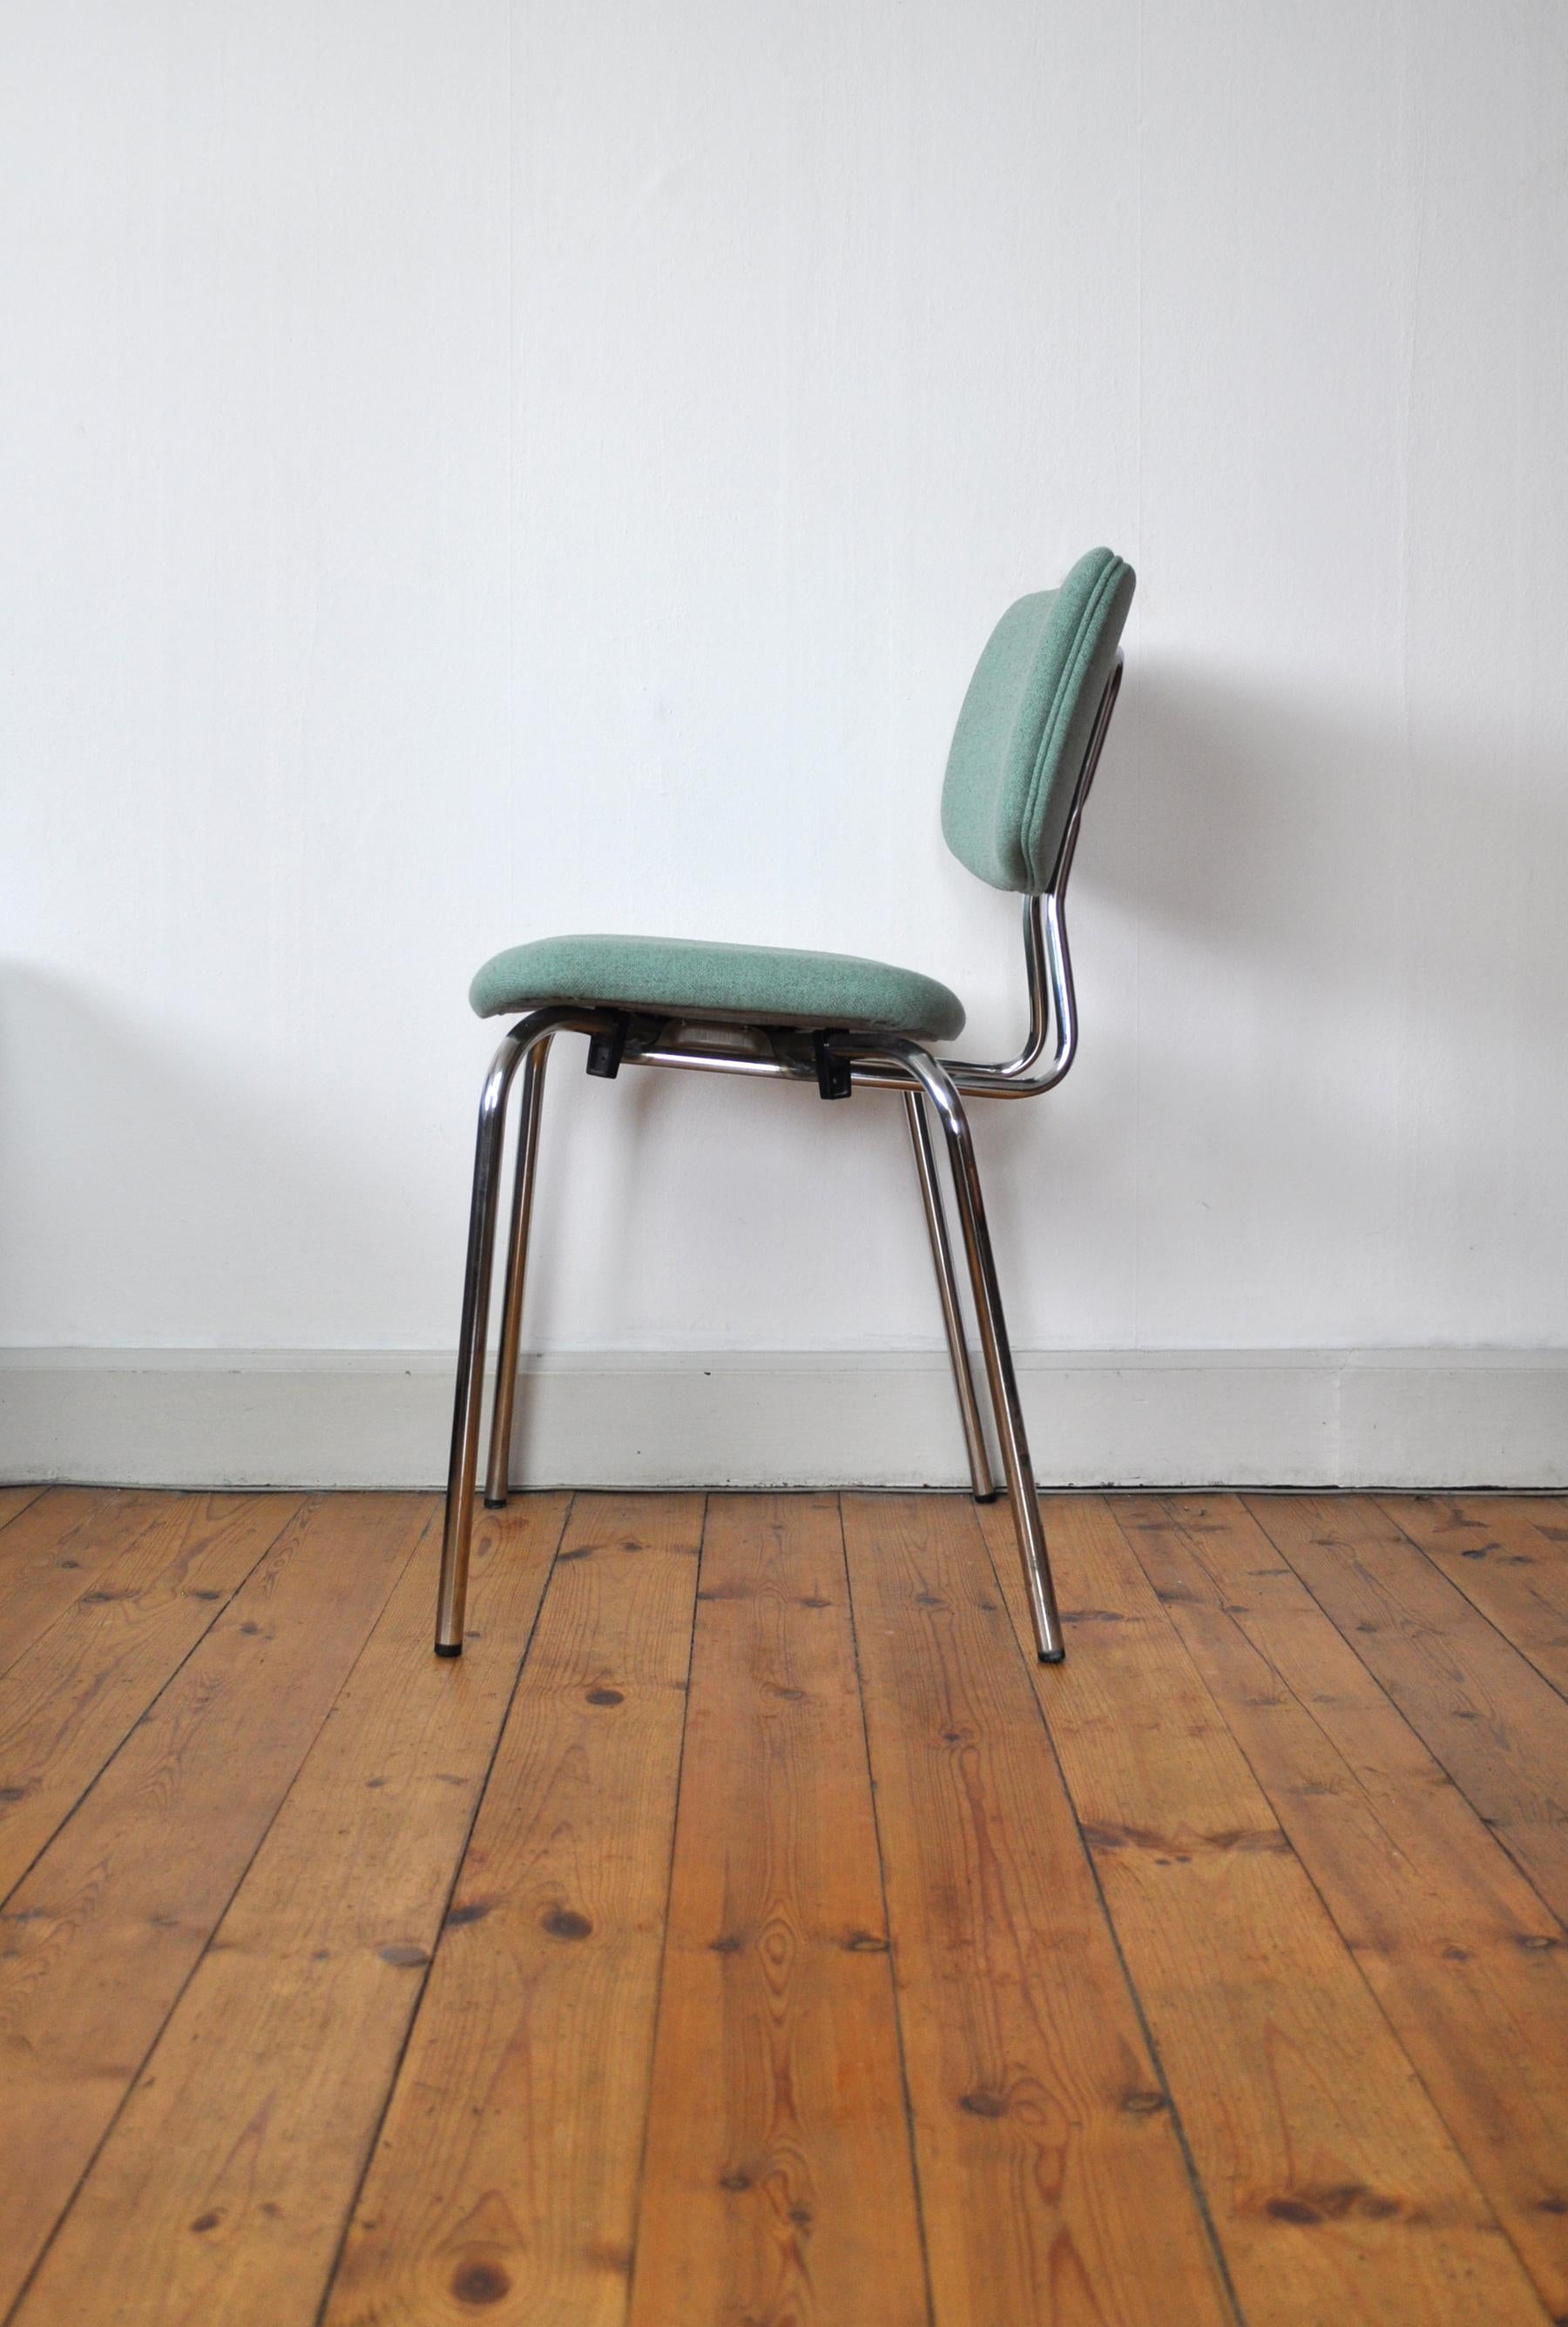 Danish side or dining chair by Duba produced, 1970.
Chromed frame and new Kvadrat upholstery.

Nice vintage condition, signs of wear consistent with age and use.

Dimensions:
Height 75.5 cm
Width 44 cm (seat)
Depth 48 cm
Seat height 47 cm.